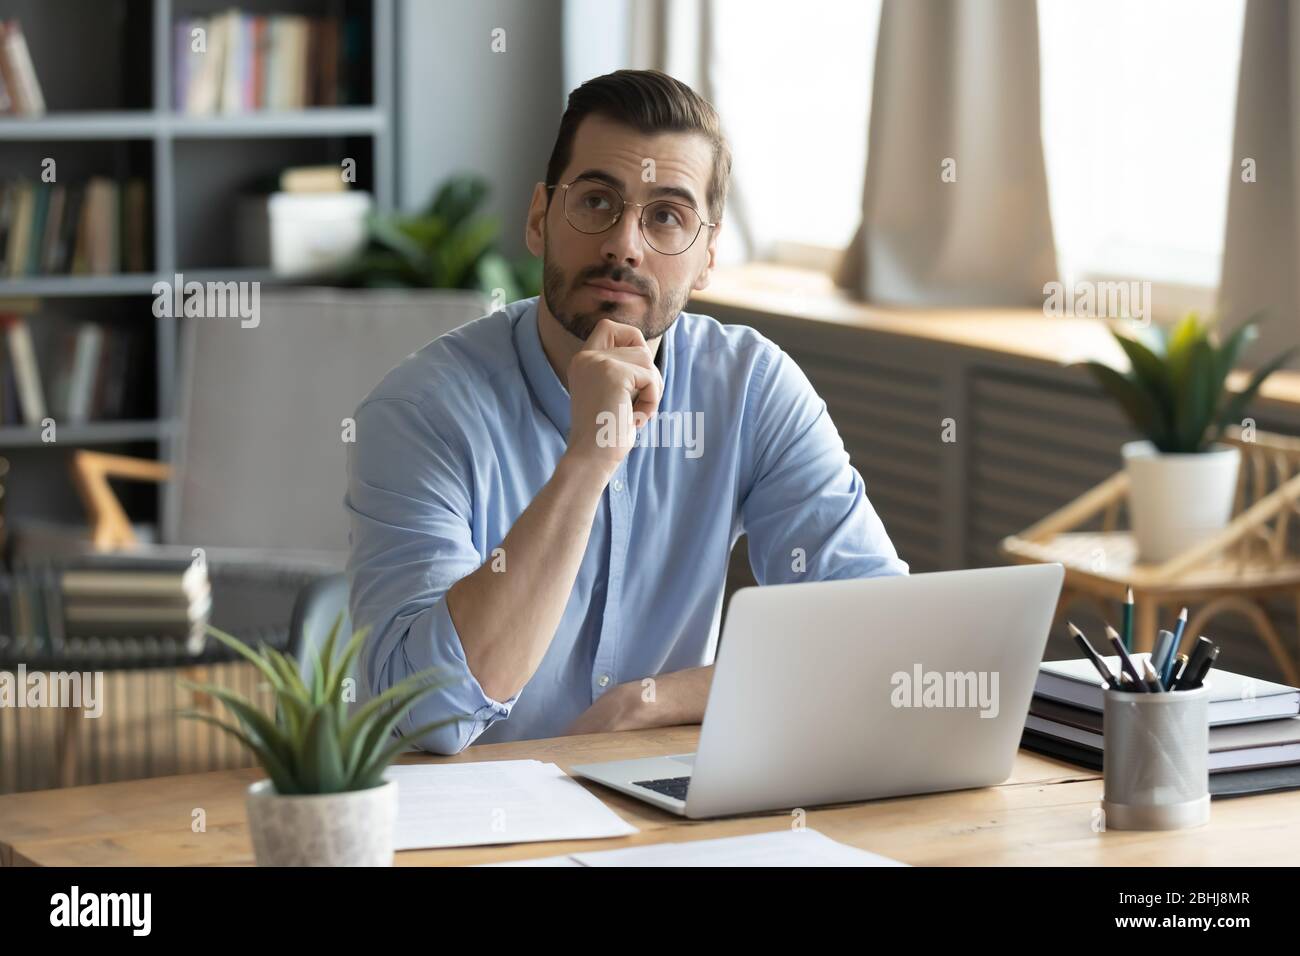 Thoughtful businessman wearing glasses touching chin, pondering ideas Stock Photo